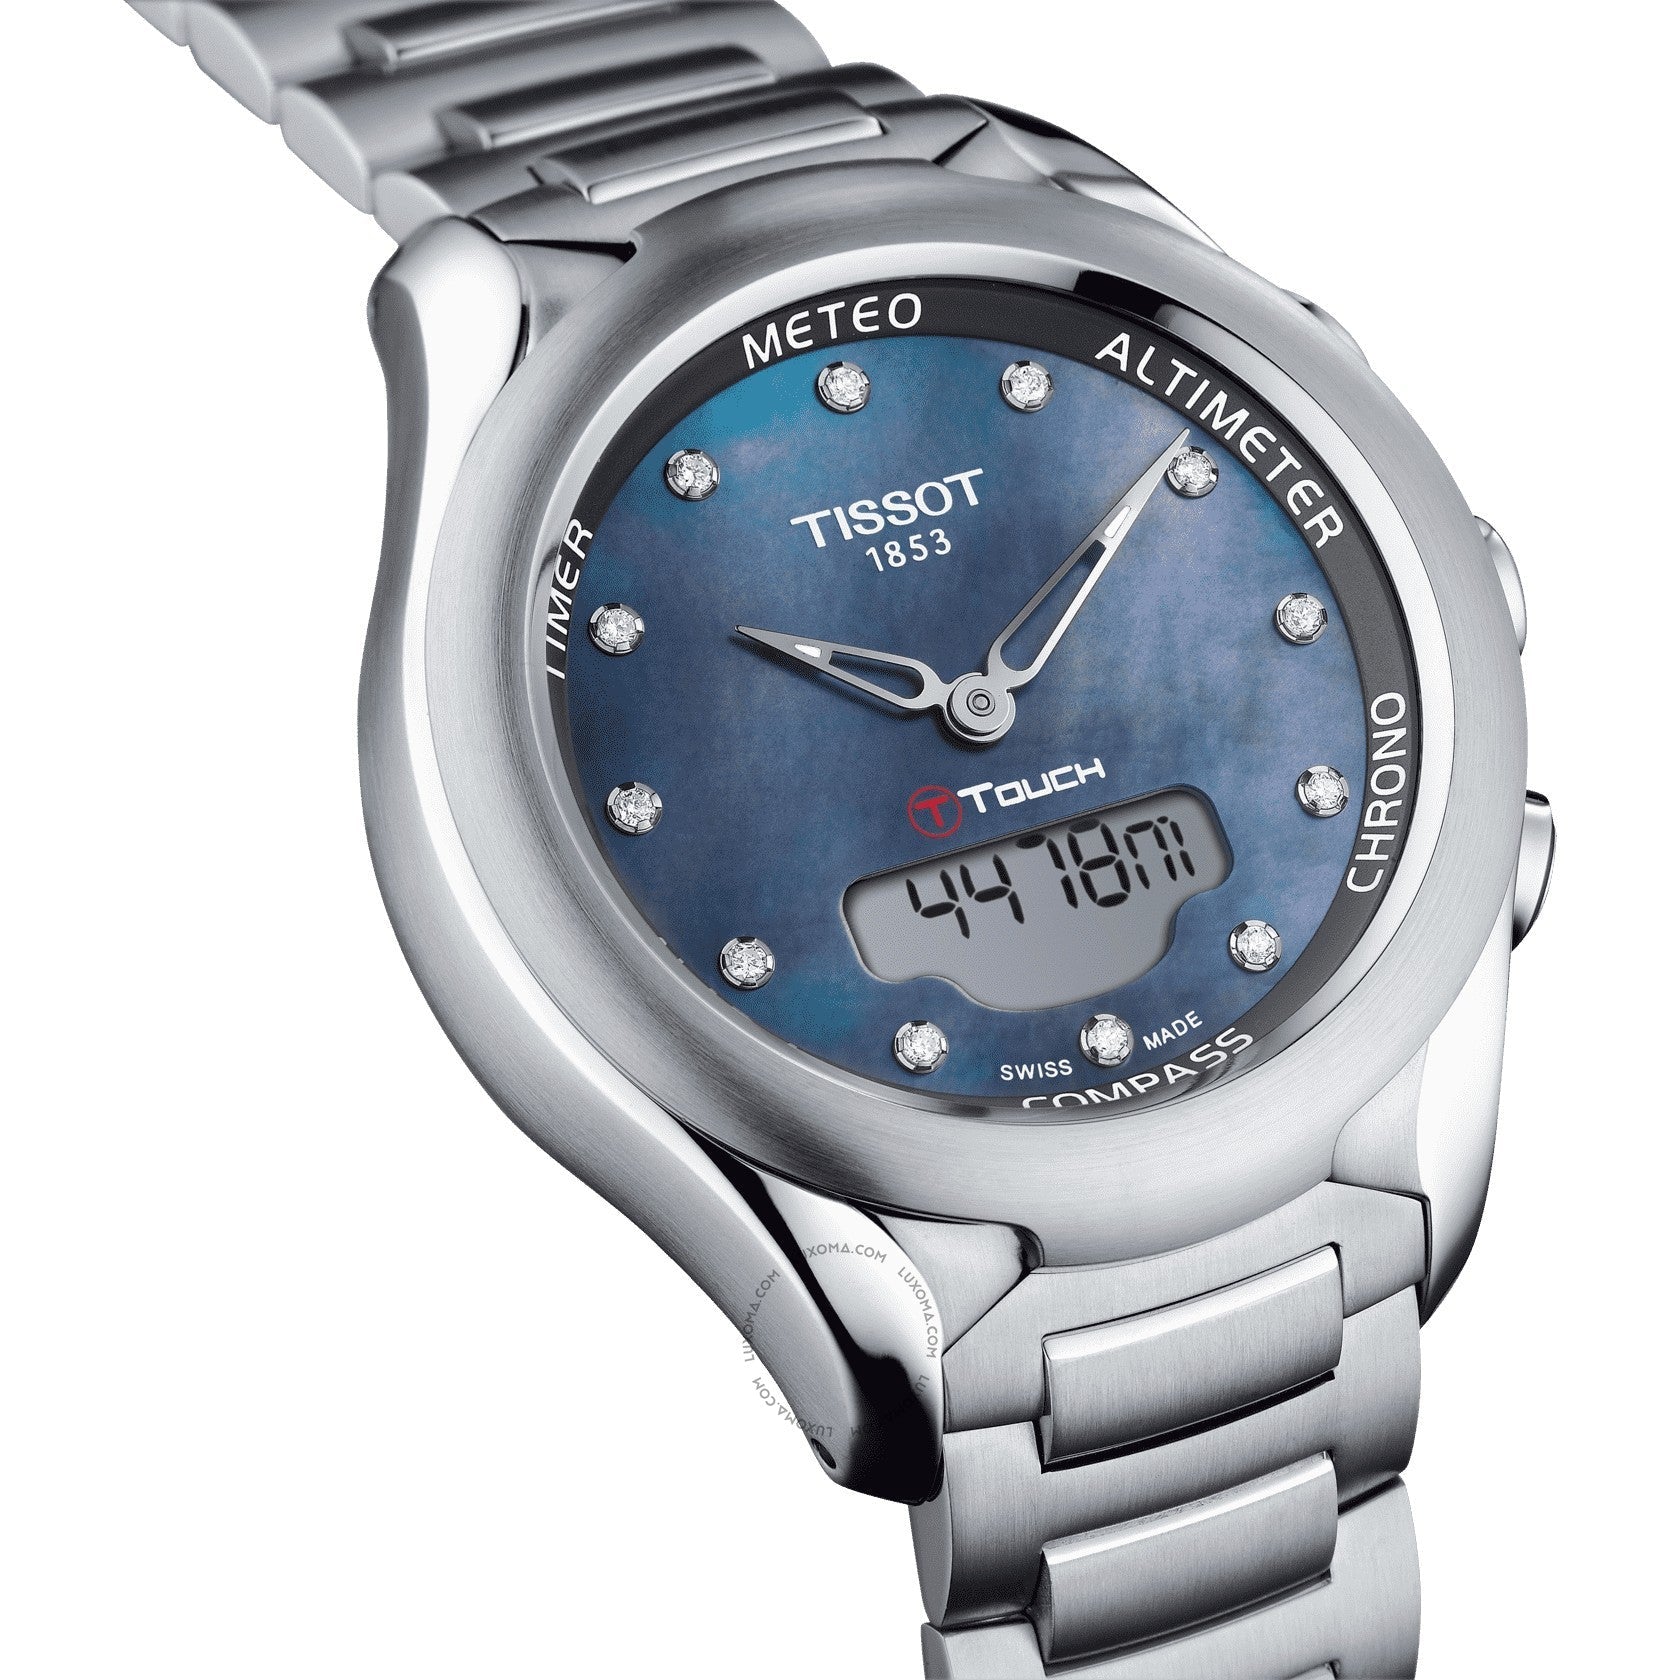 Tissot Tissot T-Touch Expert Solar Chronograph Black Mother of Pearl Dial Ladies Watch T075.220.11.106.01